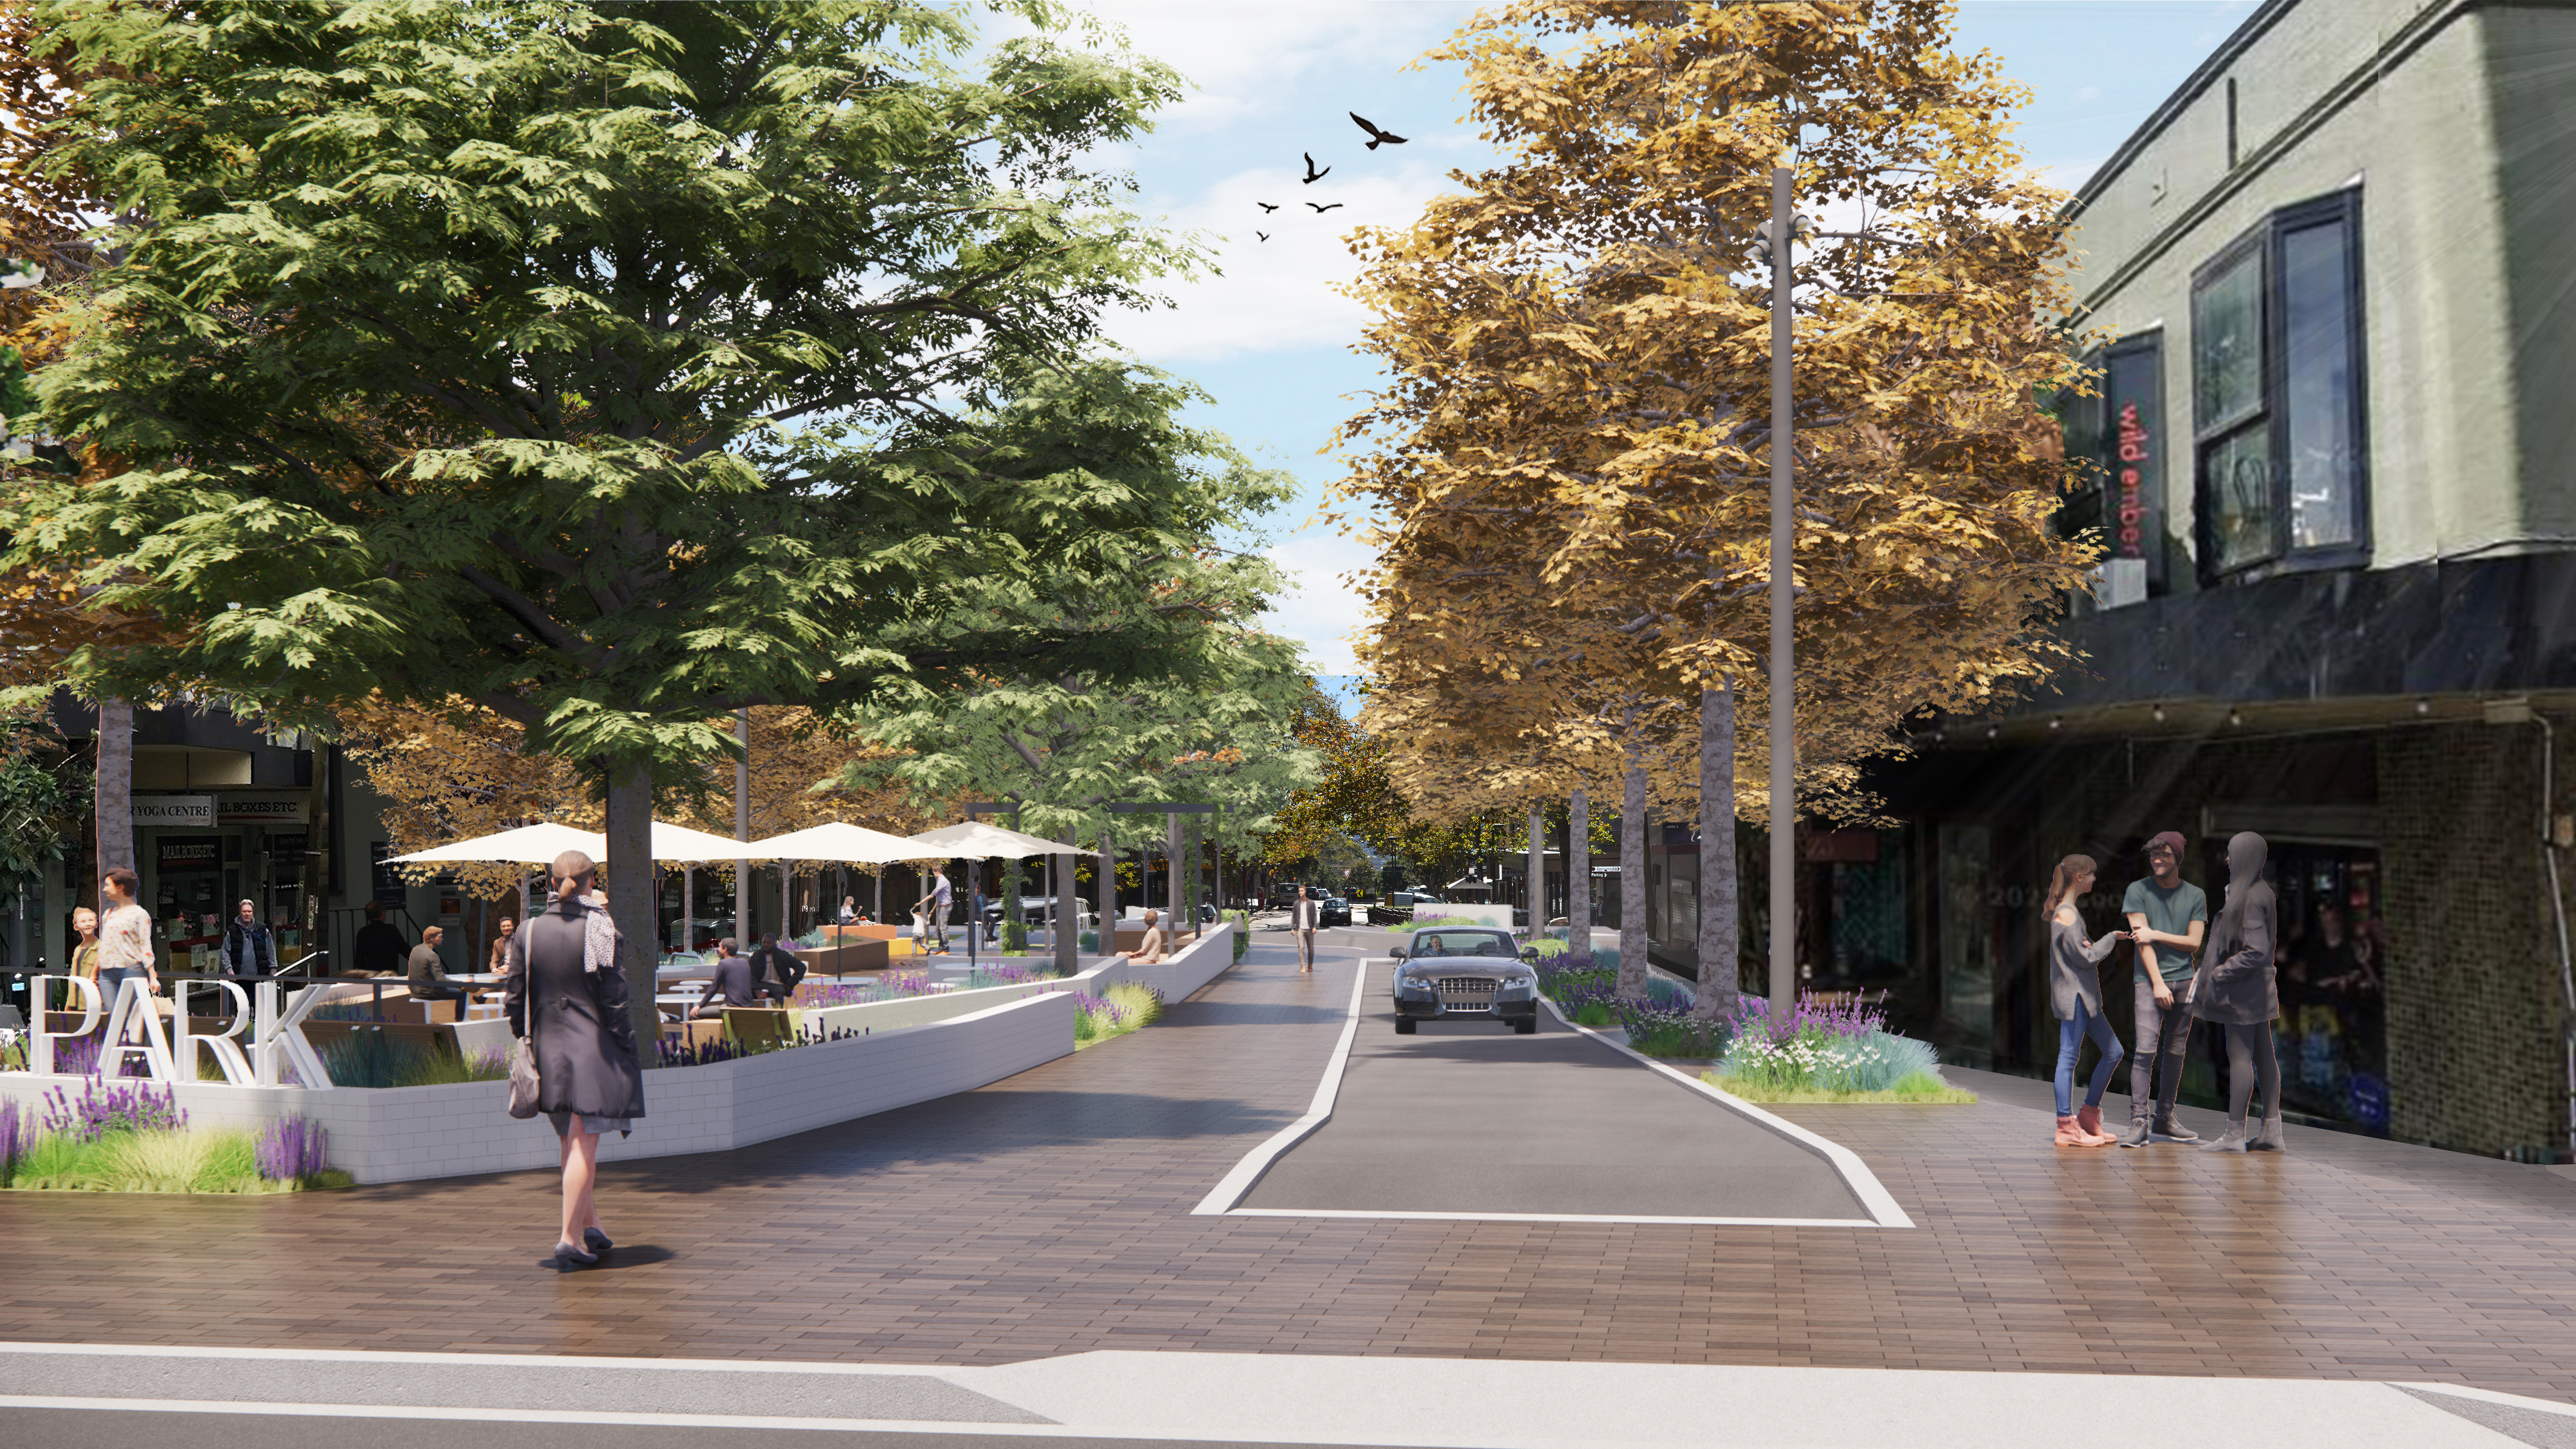 Young street plaza upgade south road view - Artist Impression